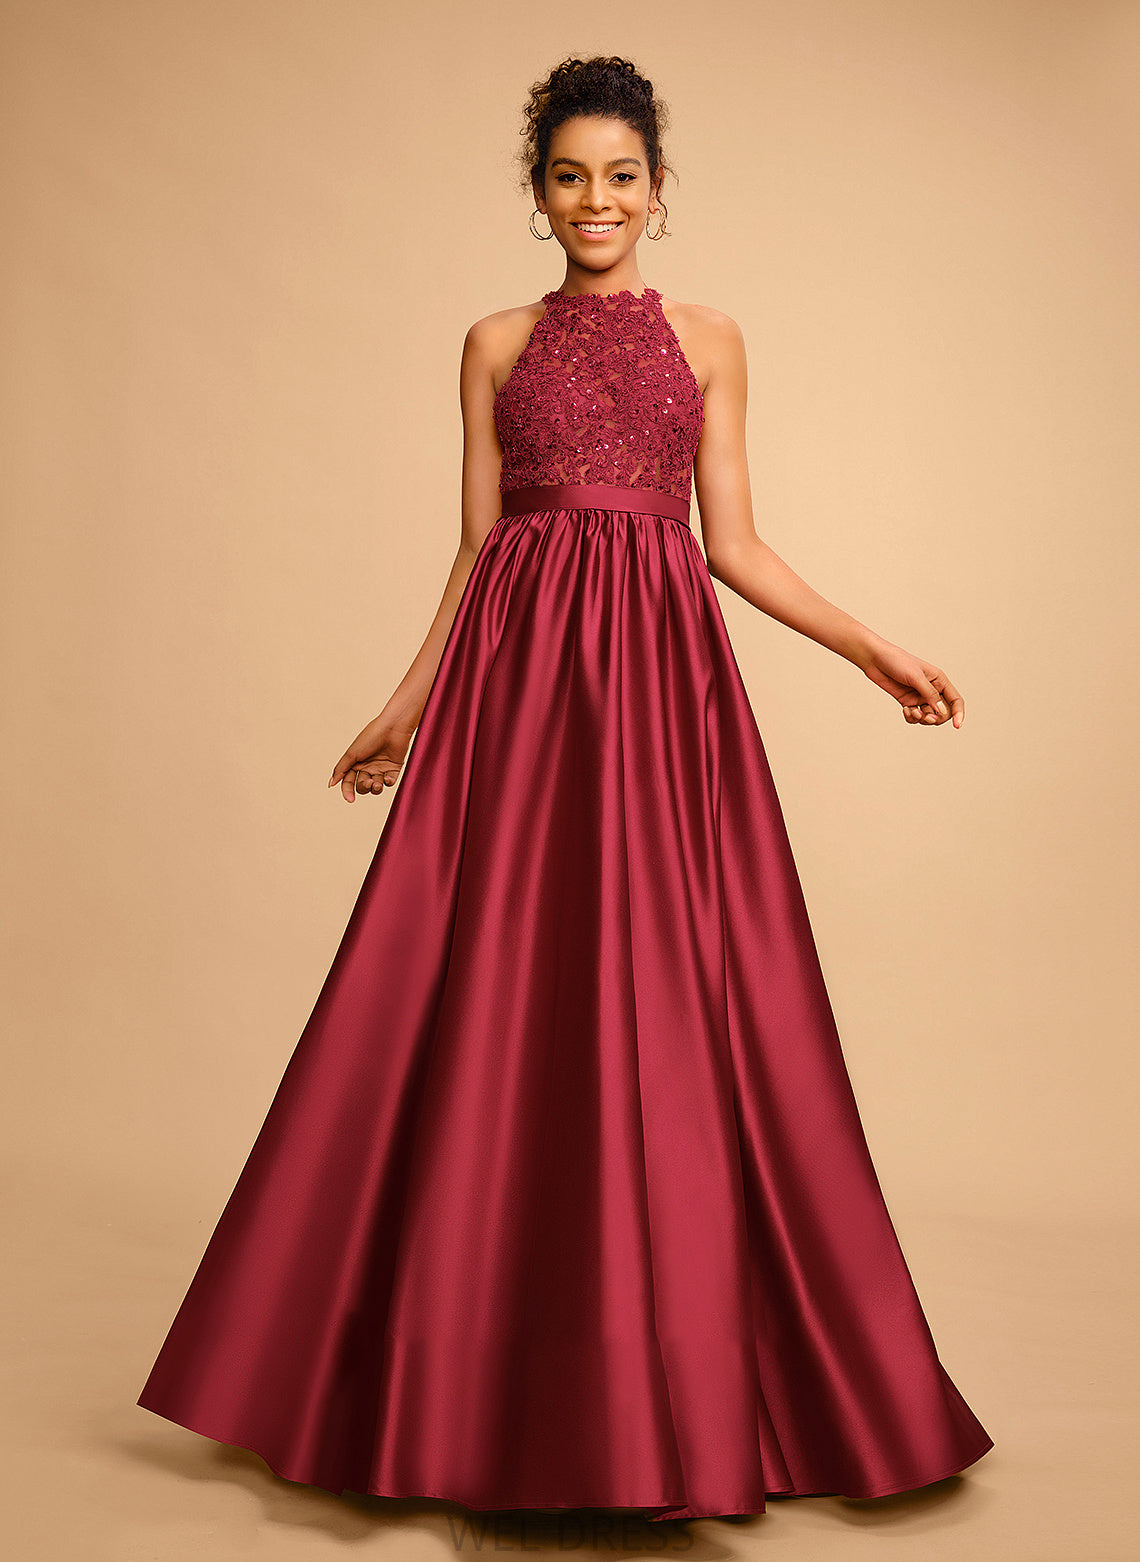 Satin Halter Floor-Length With Prom Dresses Sequins Ball-Gown/Princess Alexus